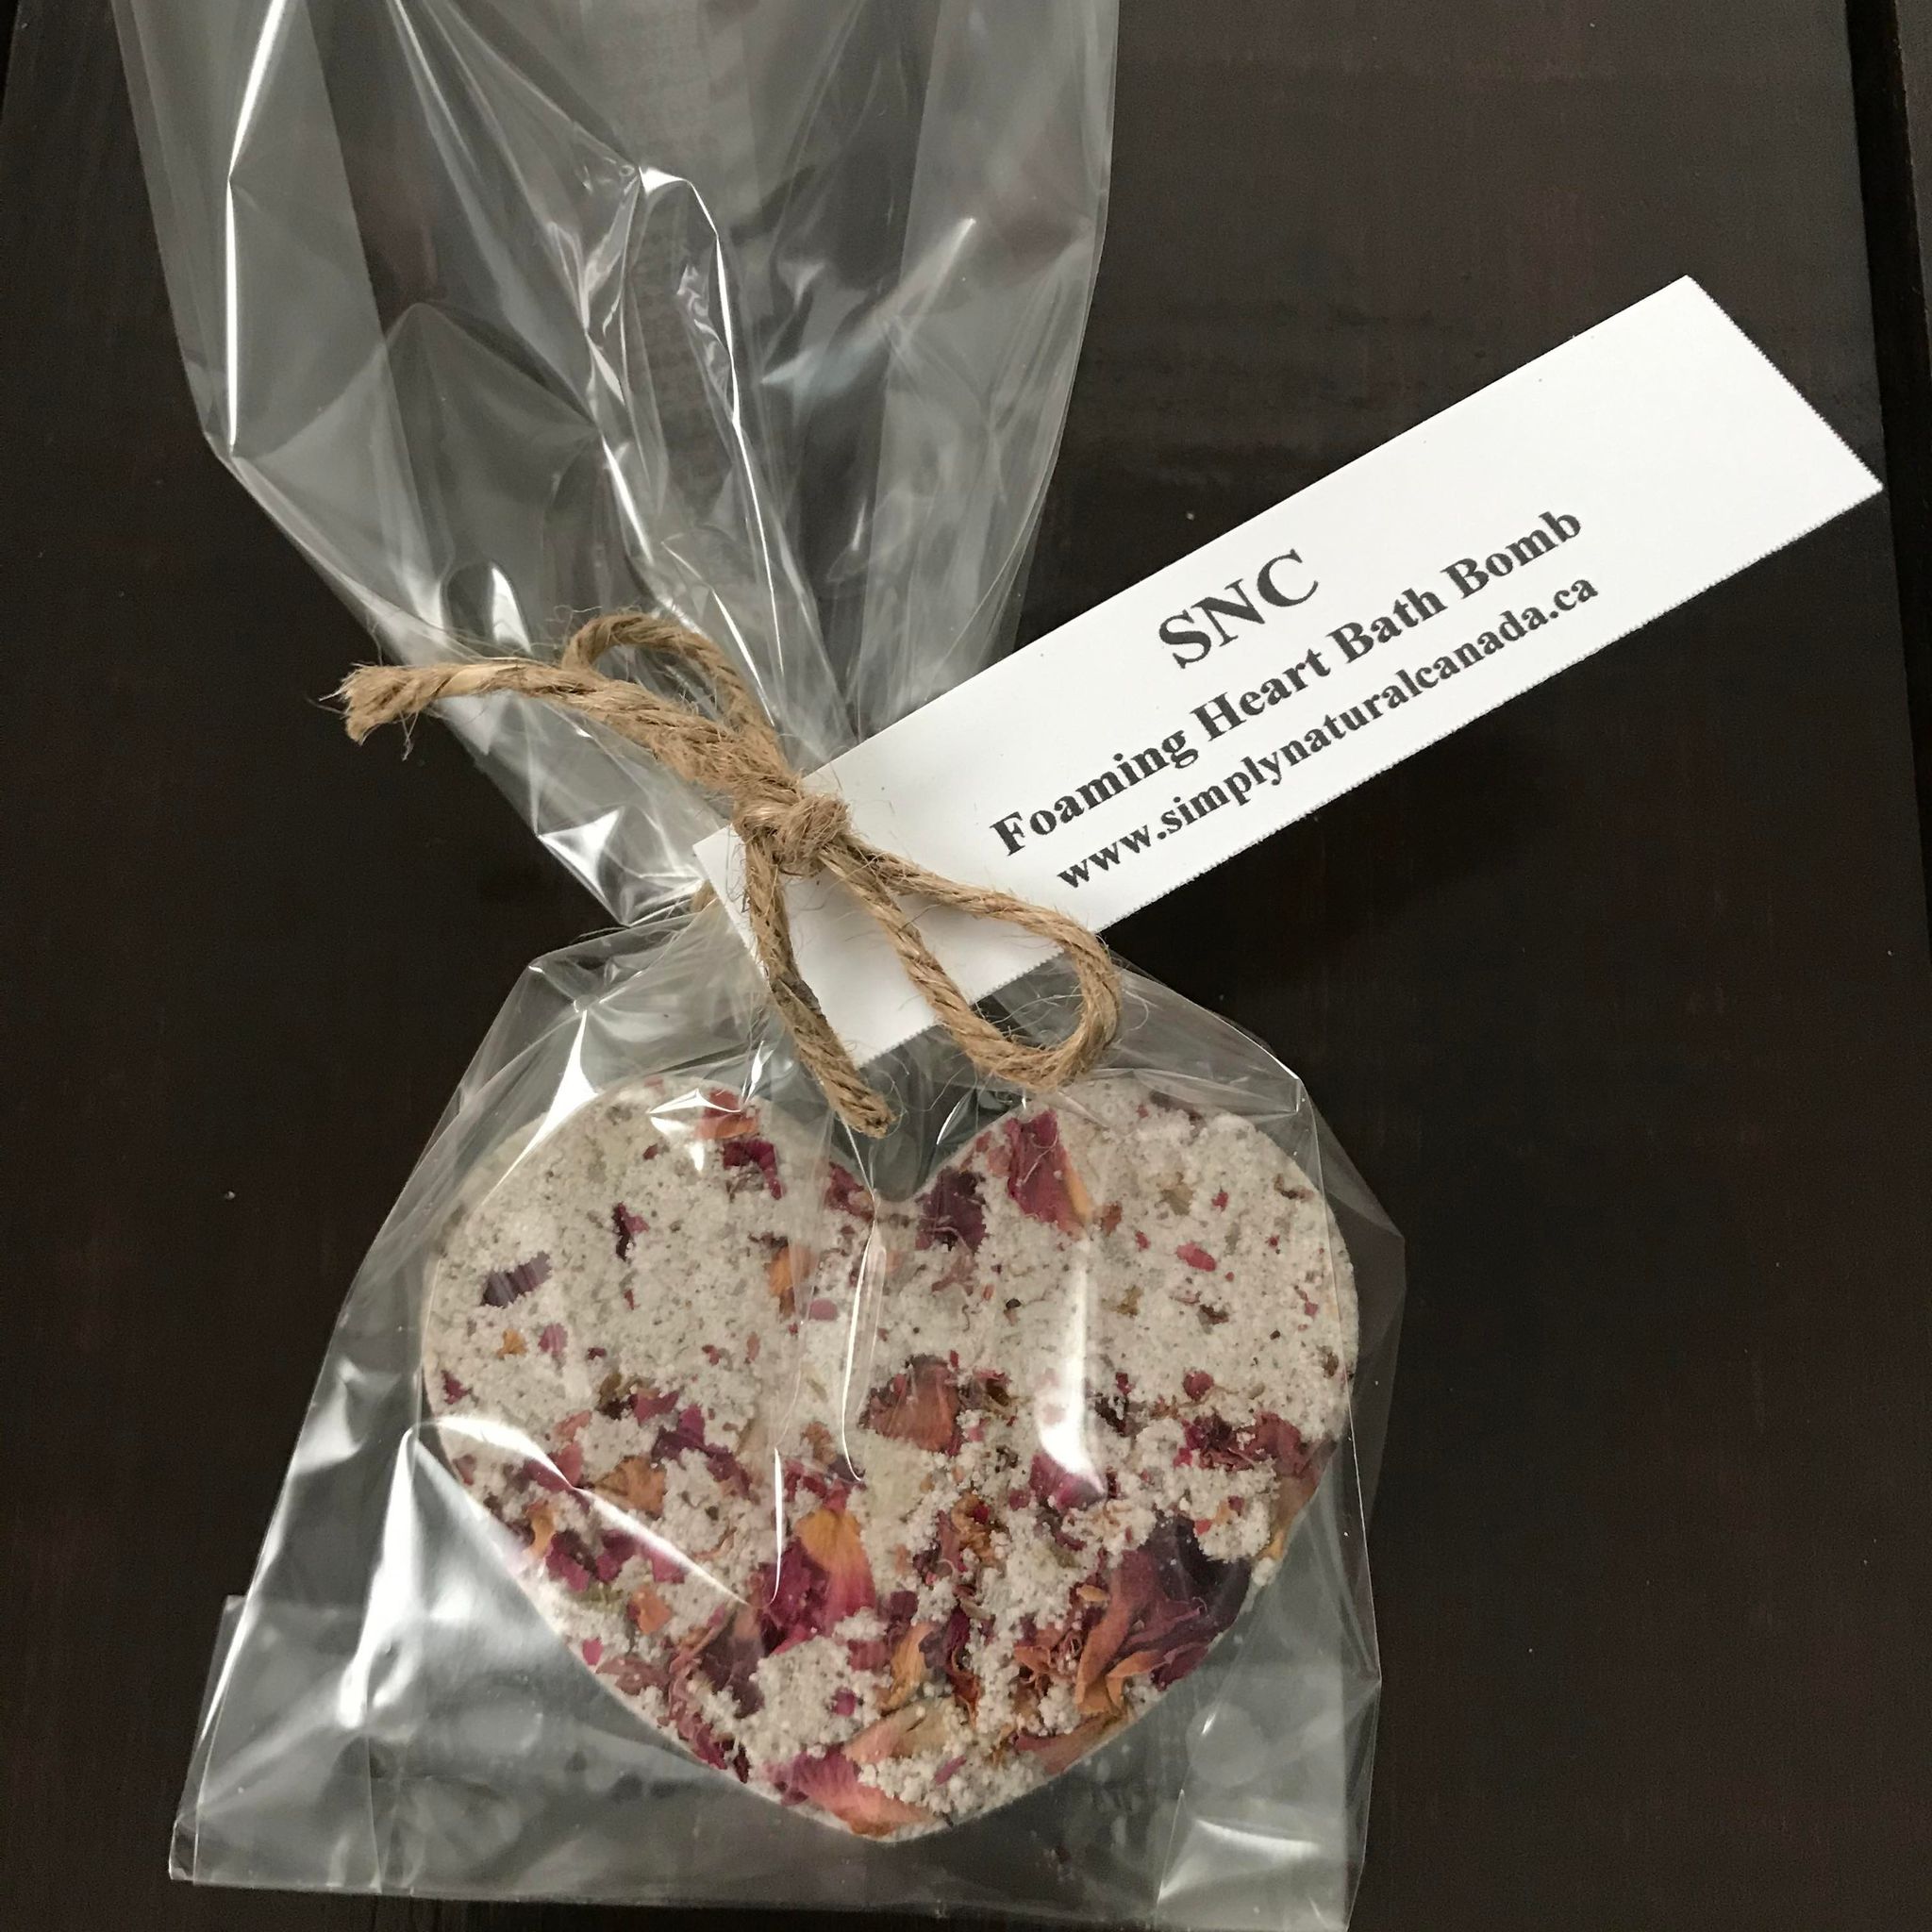  rose scented foaming heart shaped bath bomb in a compostable bag made in canada by simply natural canada